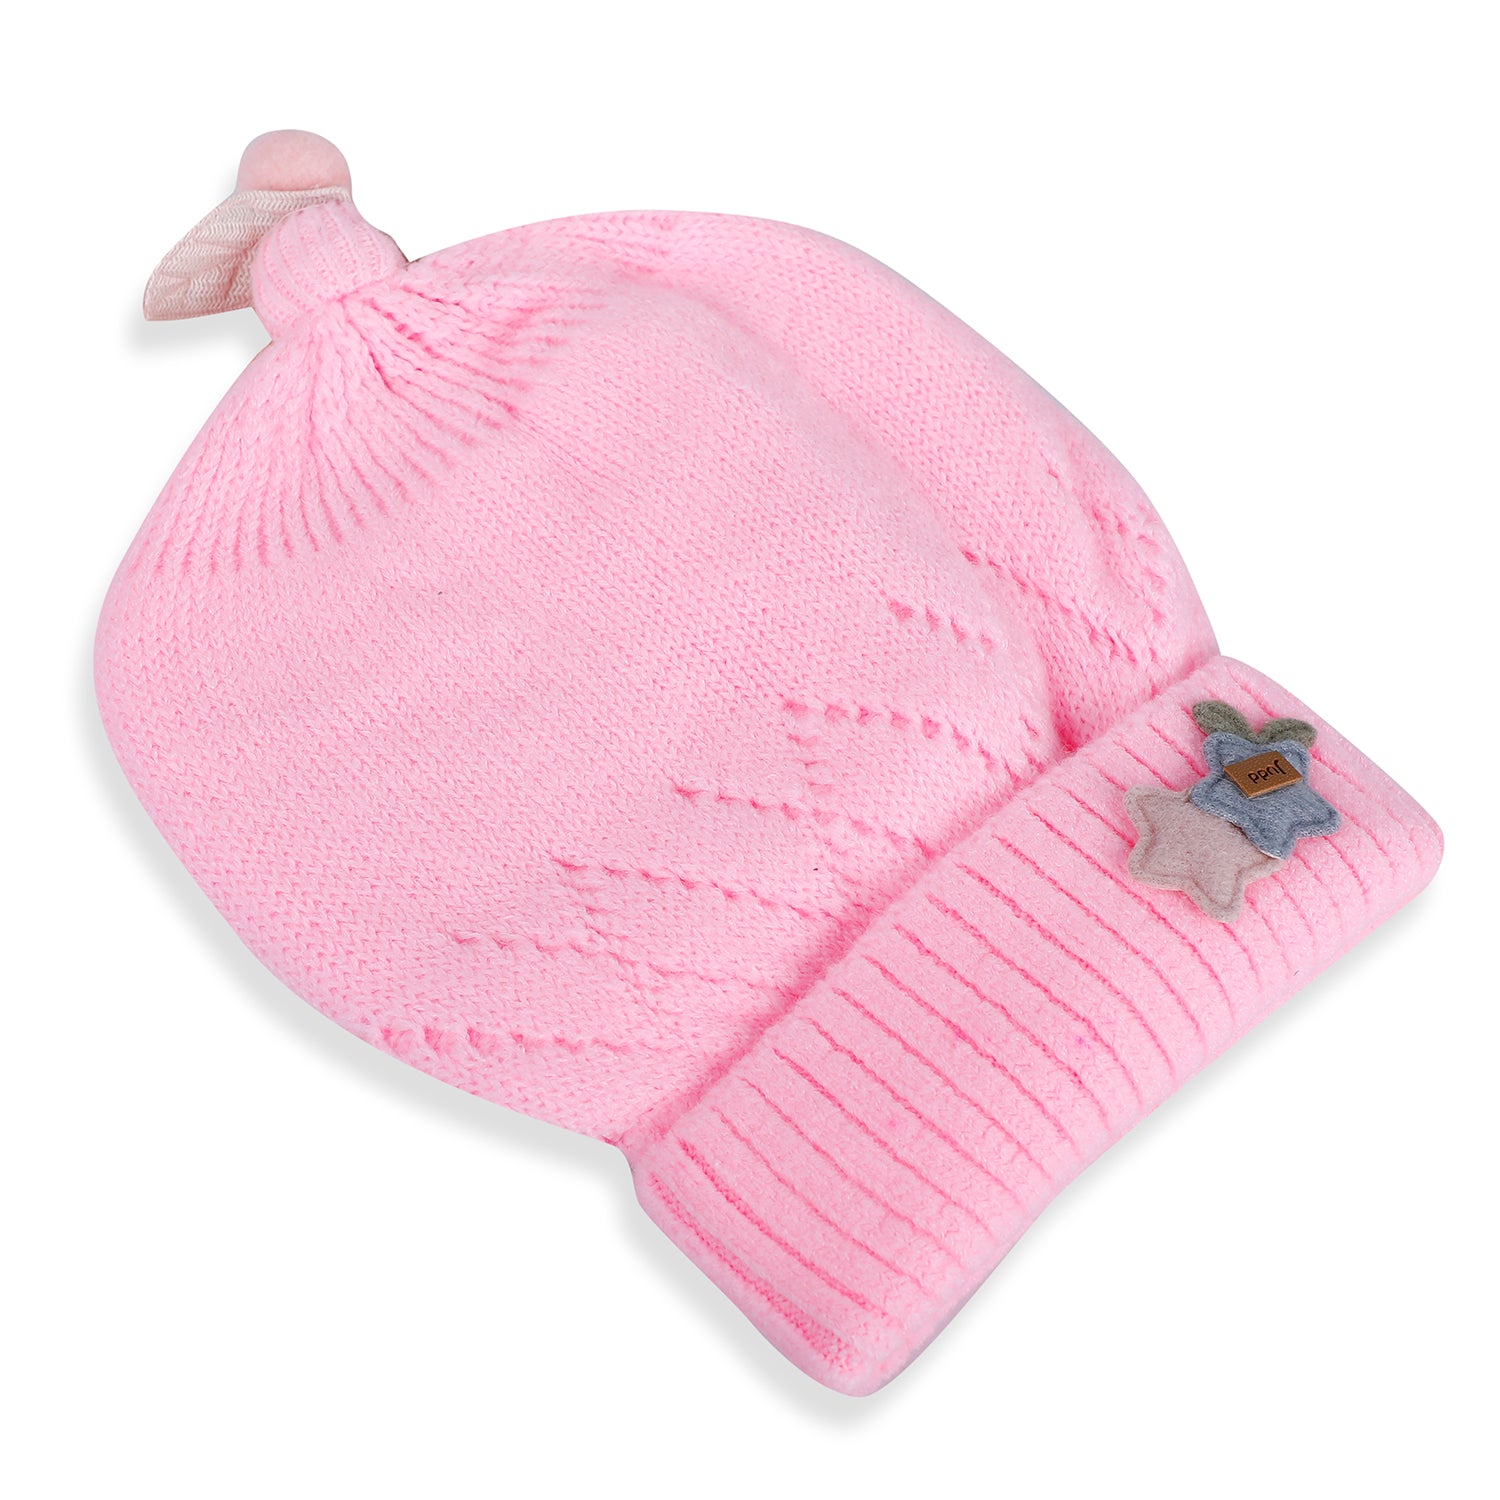 Baby Moo Star Breathable Beanie Warm Knitted Woollen Cap - Pink